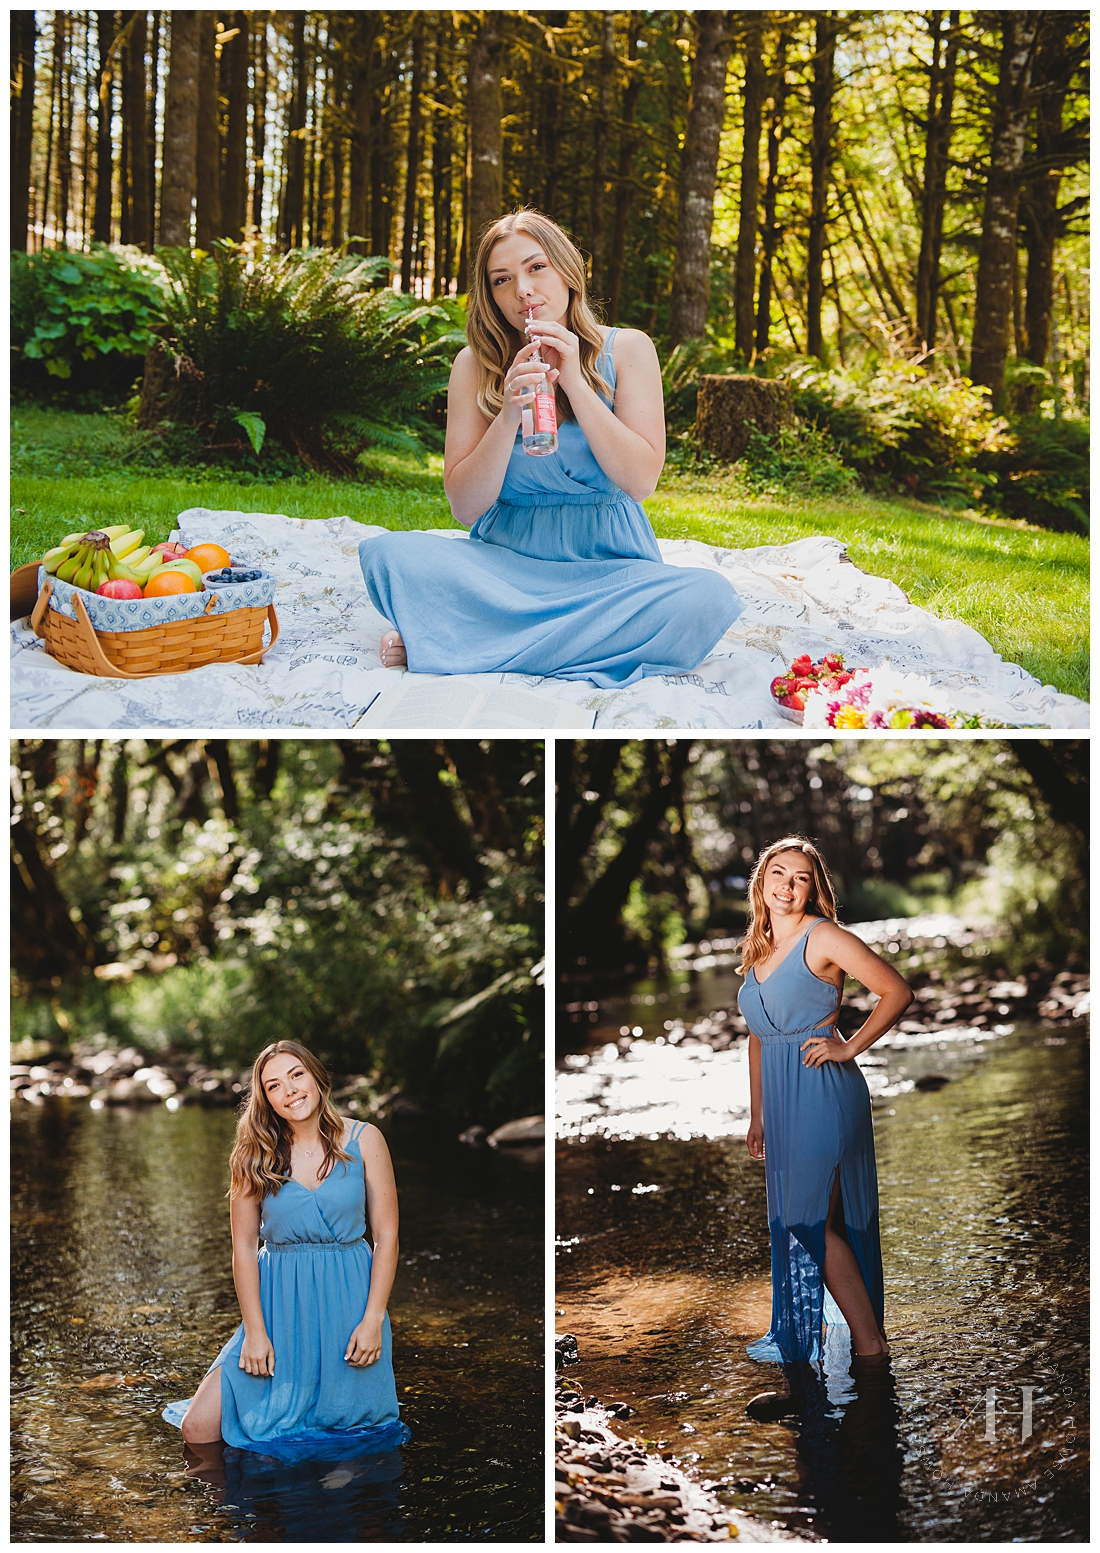 End of Summer Photoshoot with Cute Picnic and Riverside Portraits | Photographed by Tacoma Senior Photographer Amanda Howse